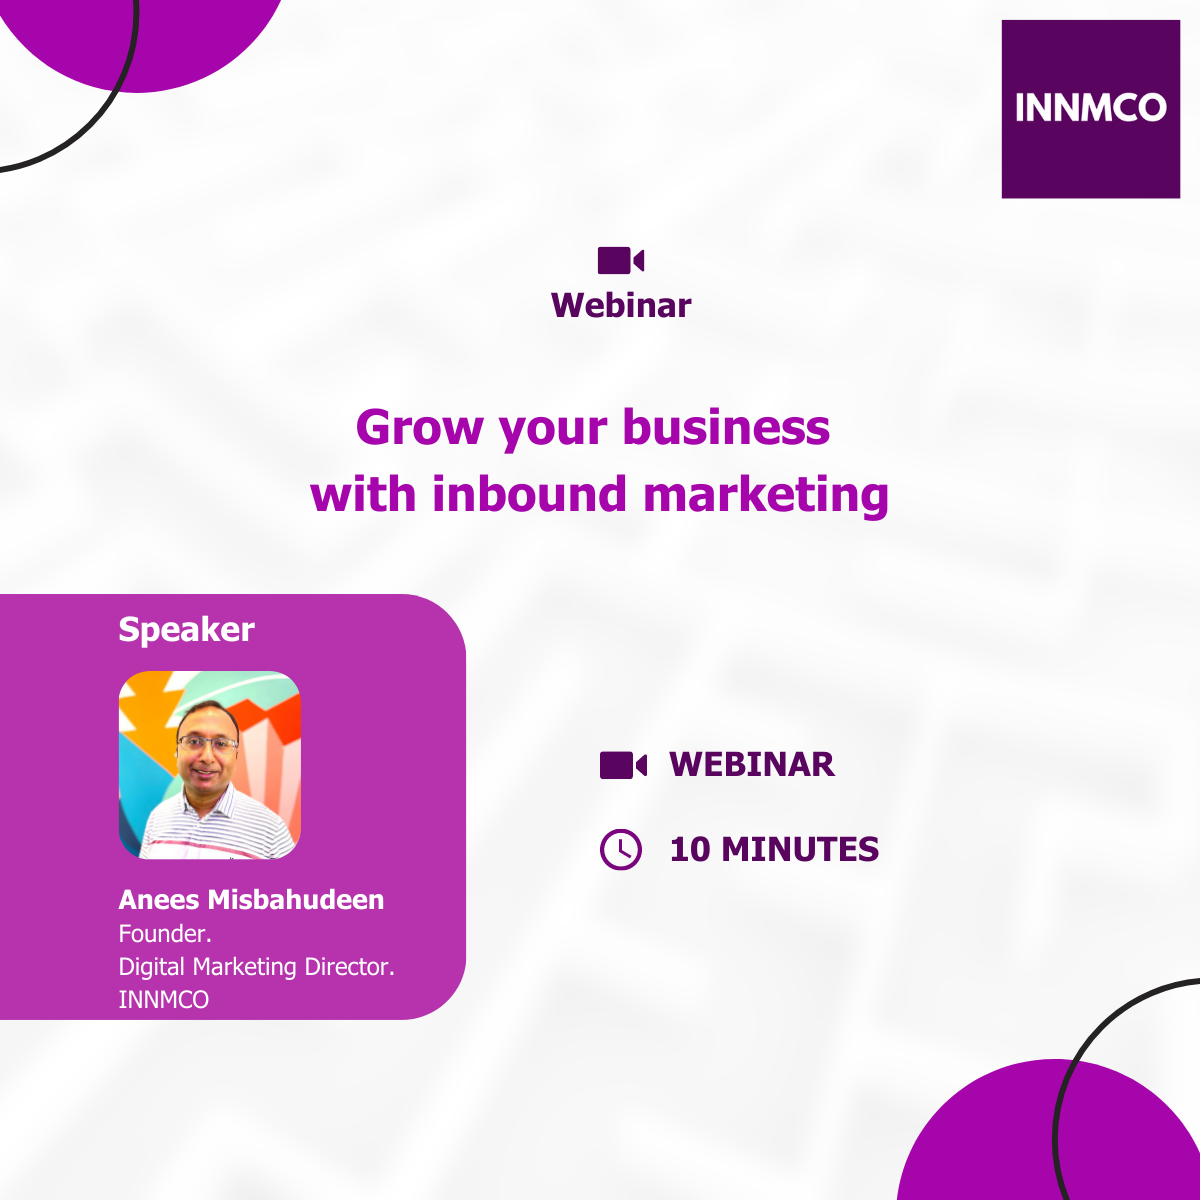 Webinar on-demand - INNMCO - Grow your business with inbound marketing